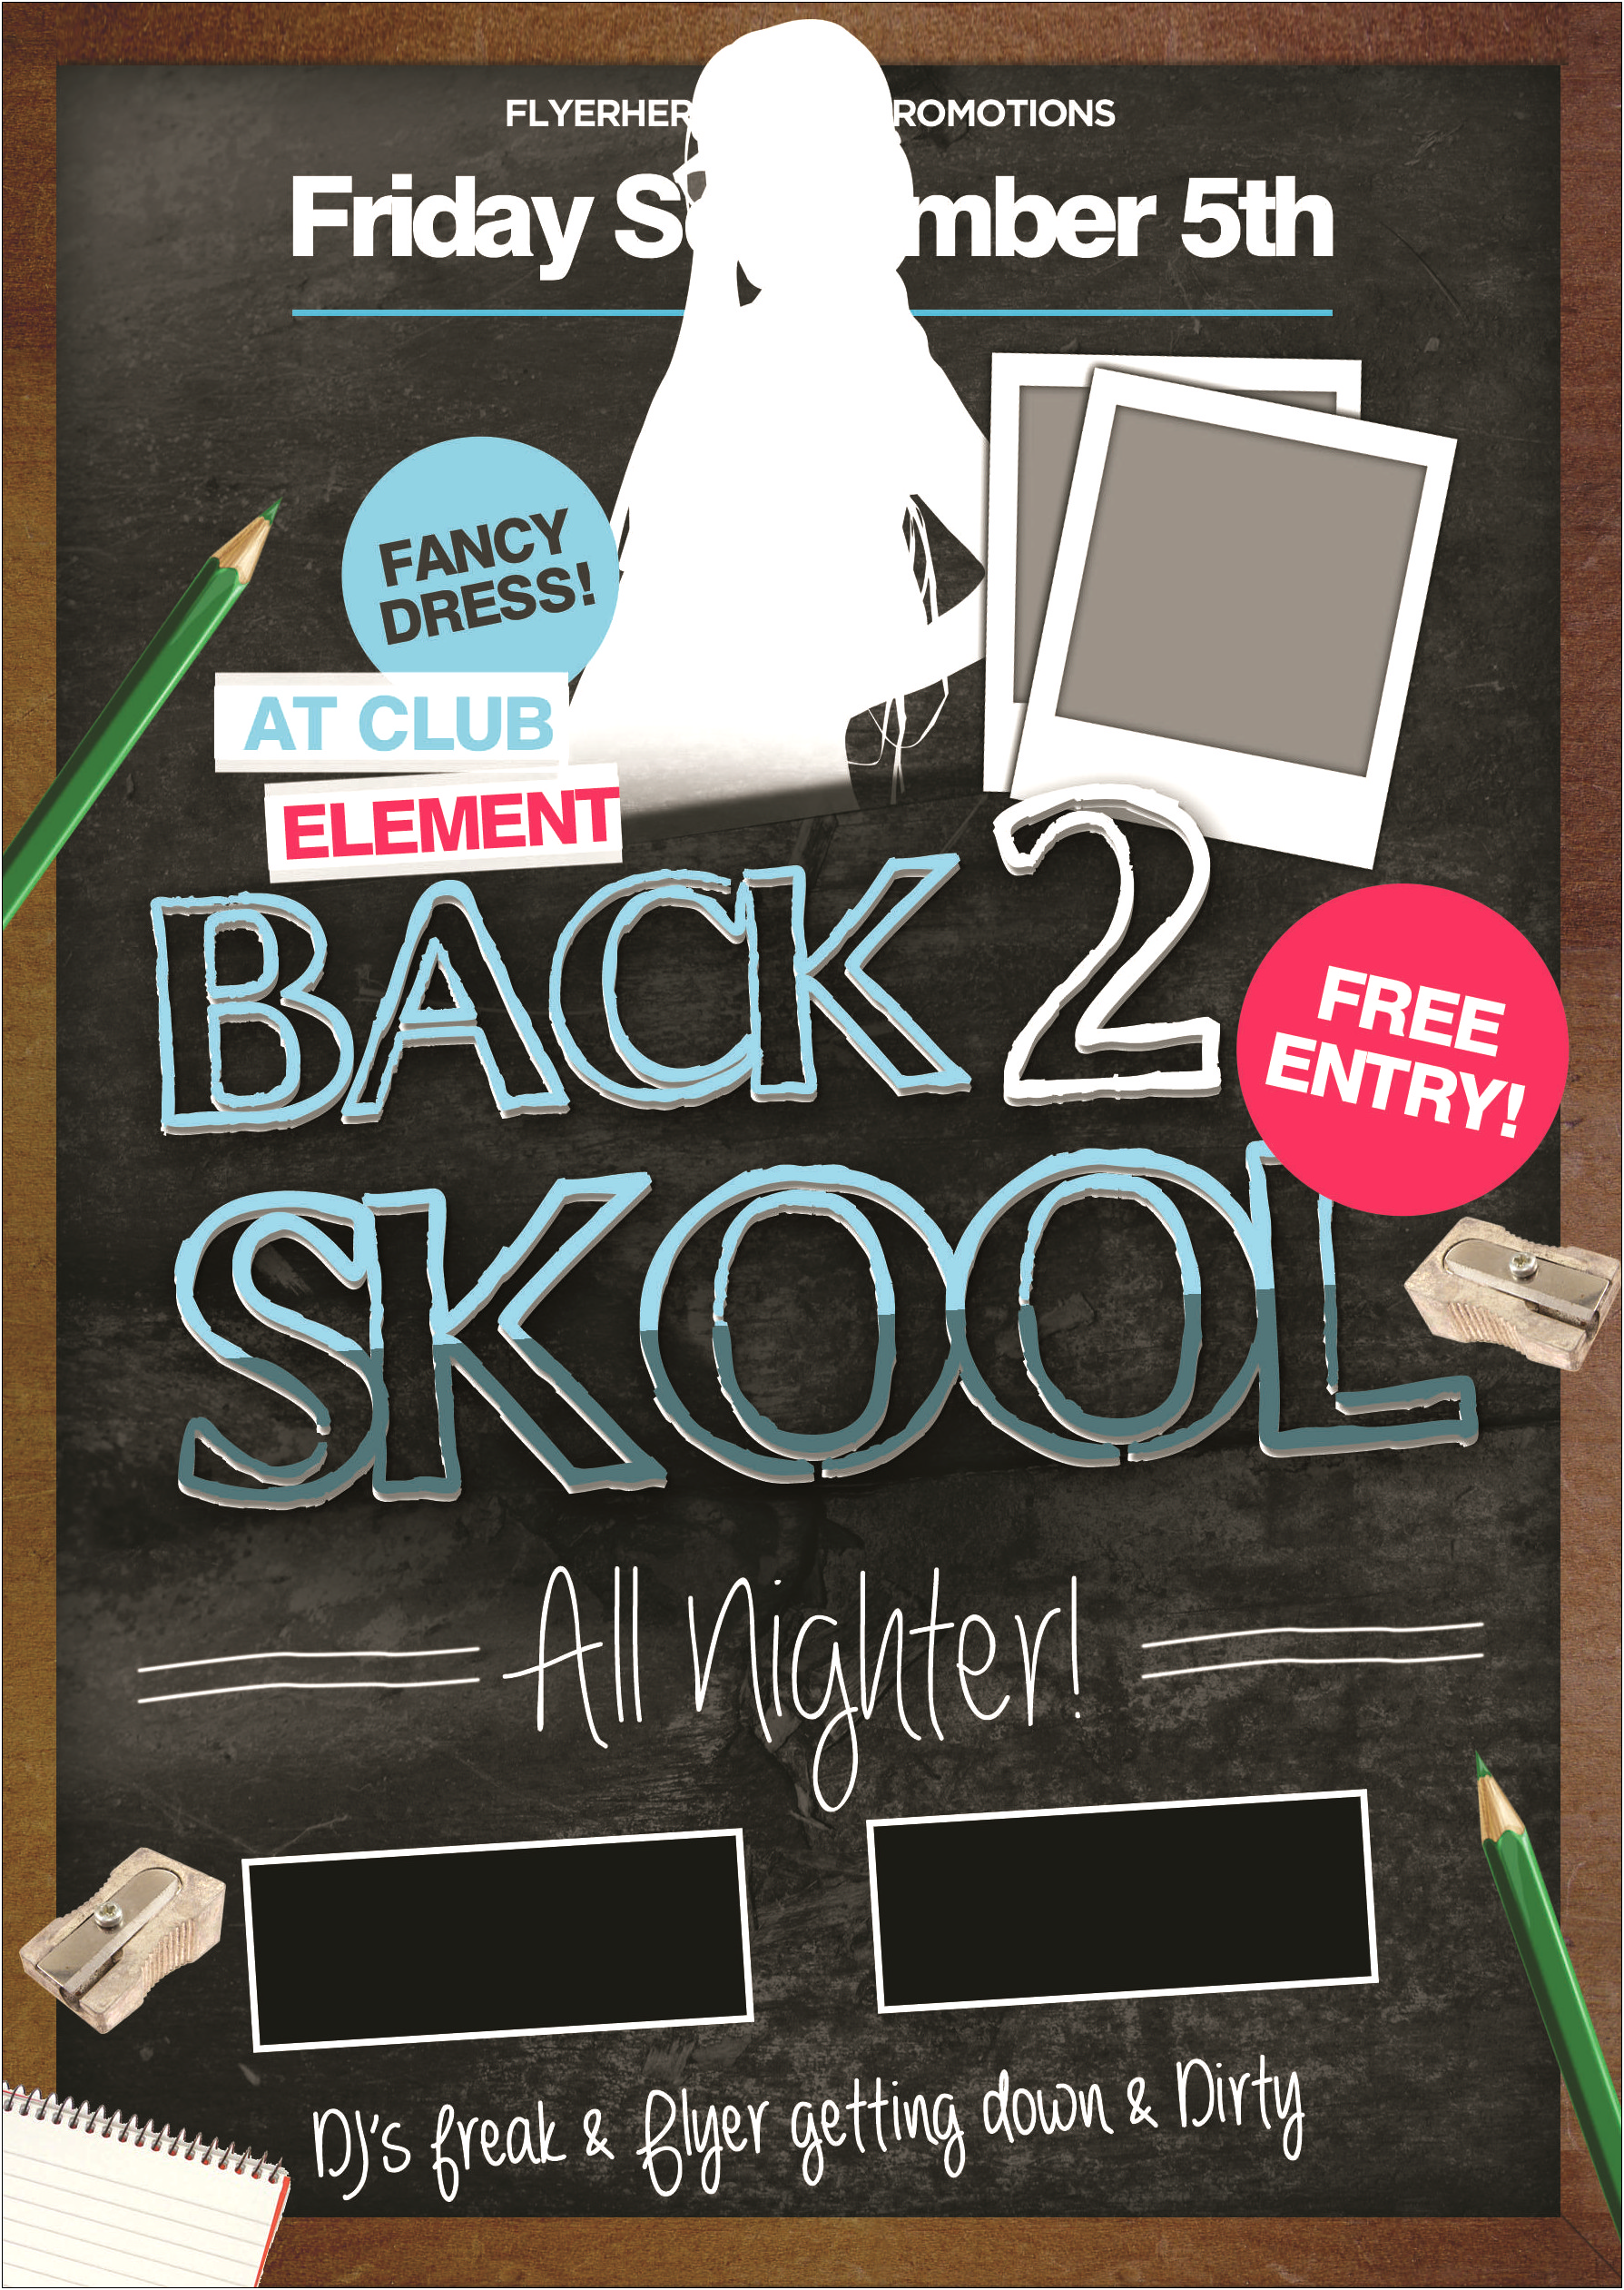 Back To School Night Flyer Template Free